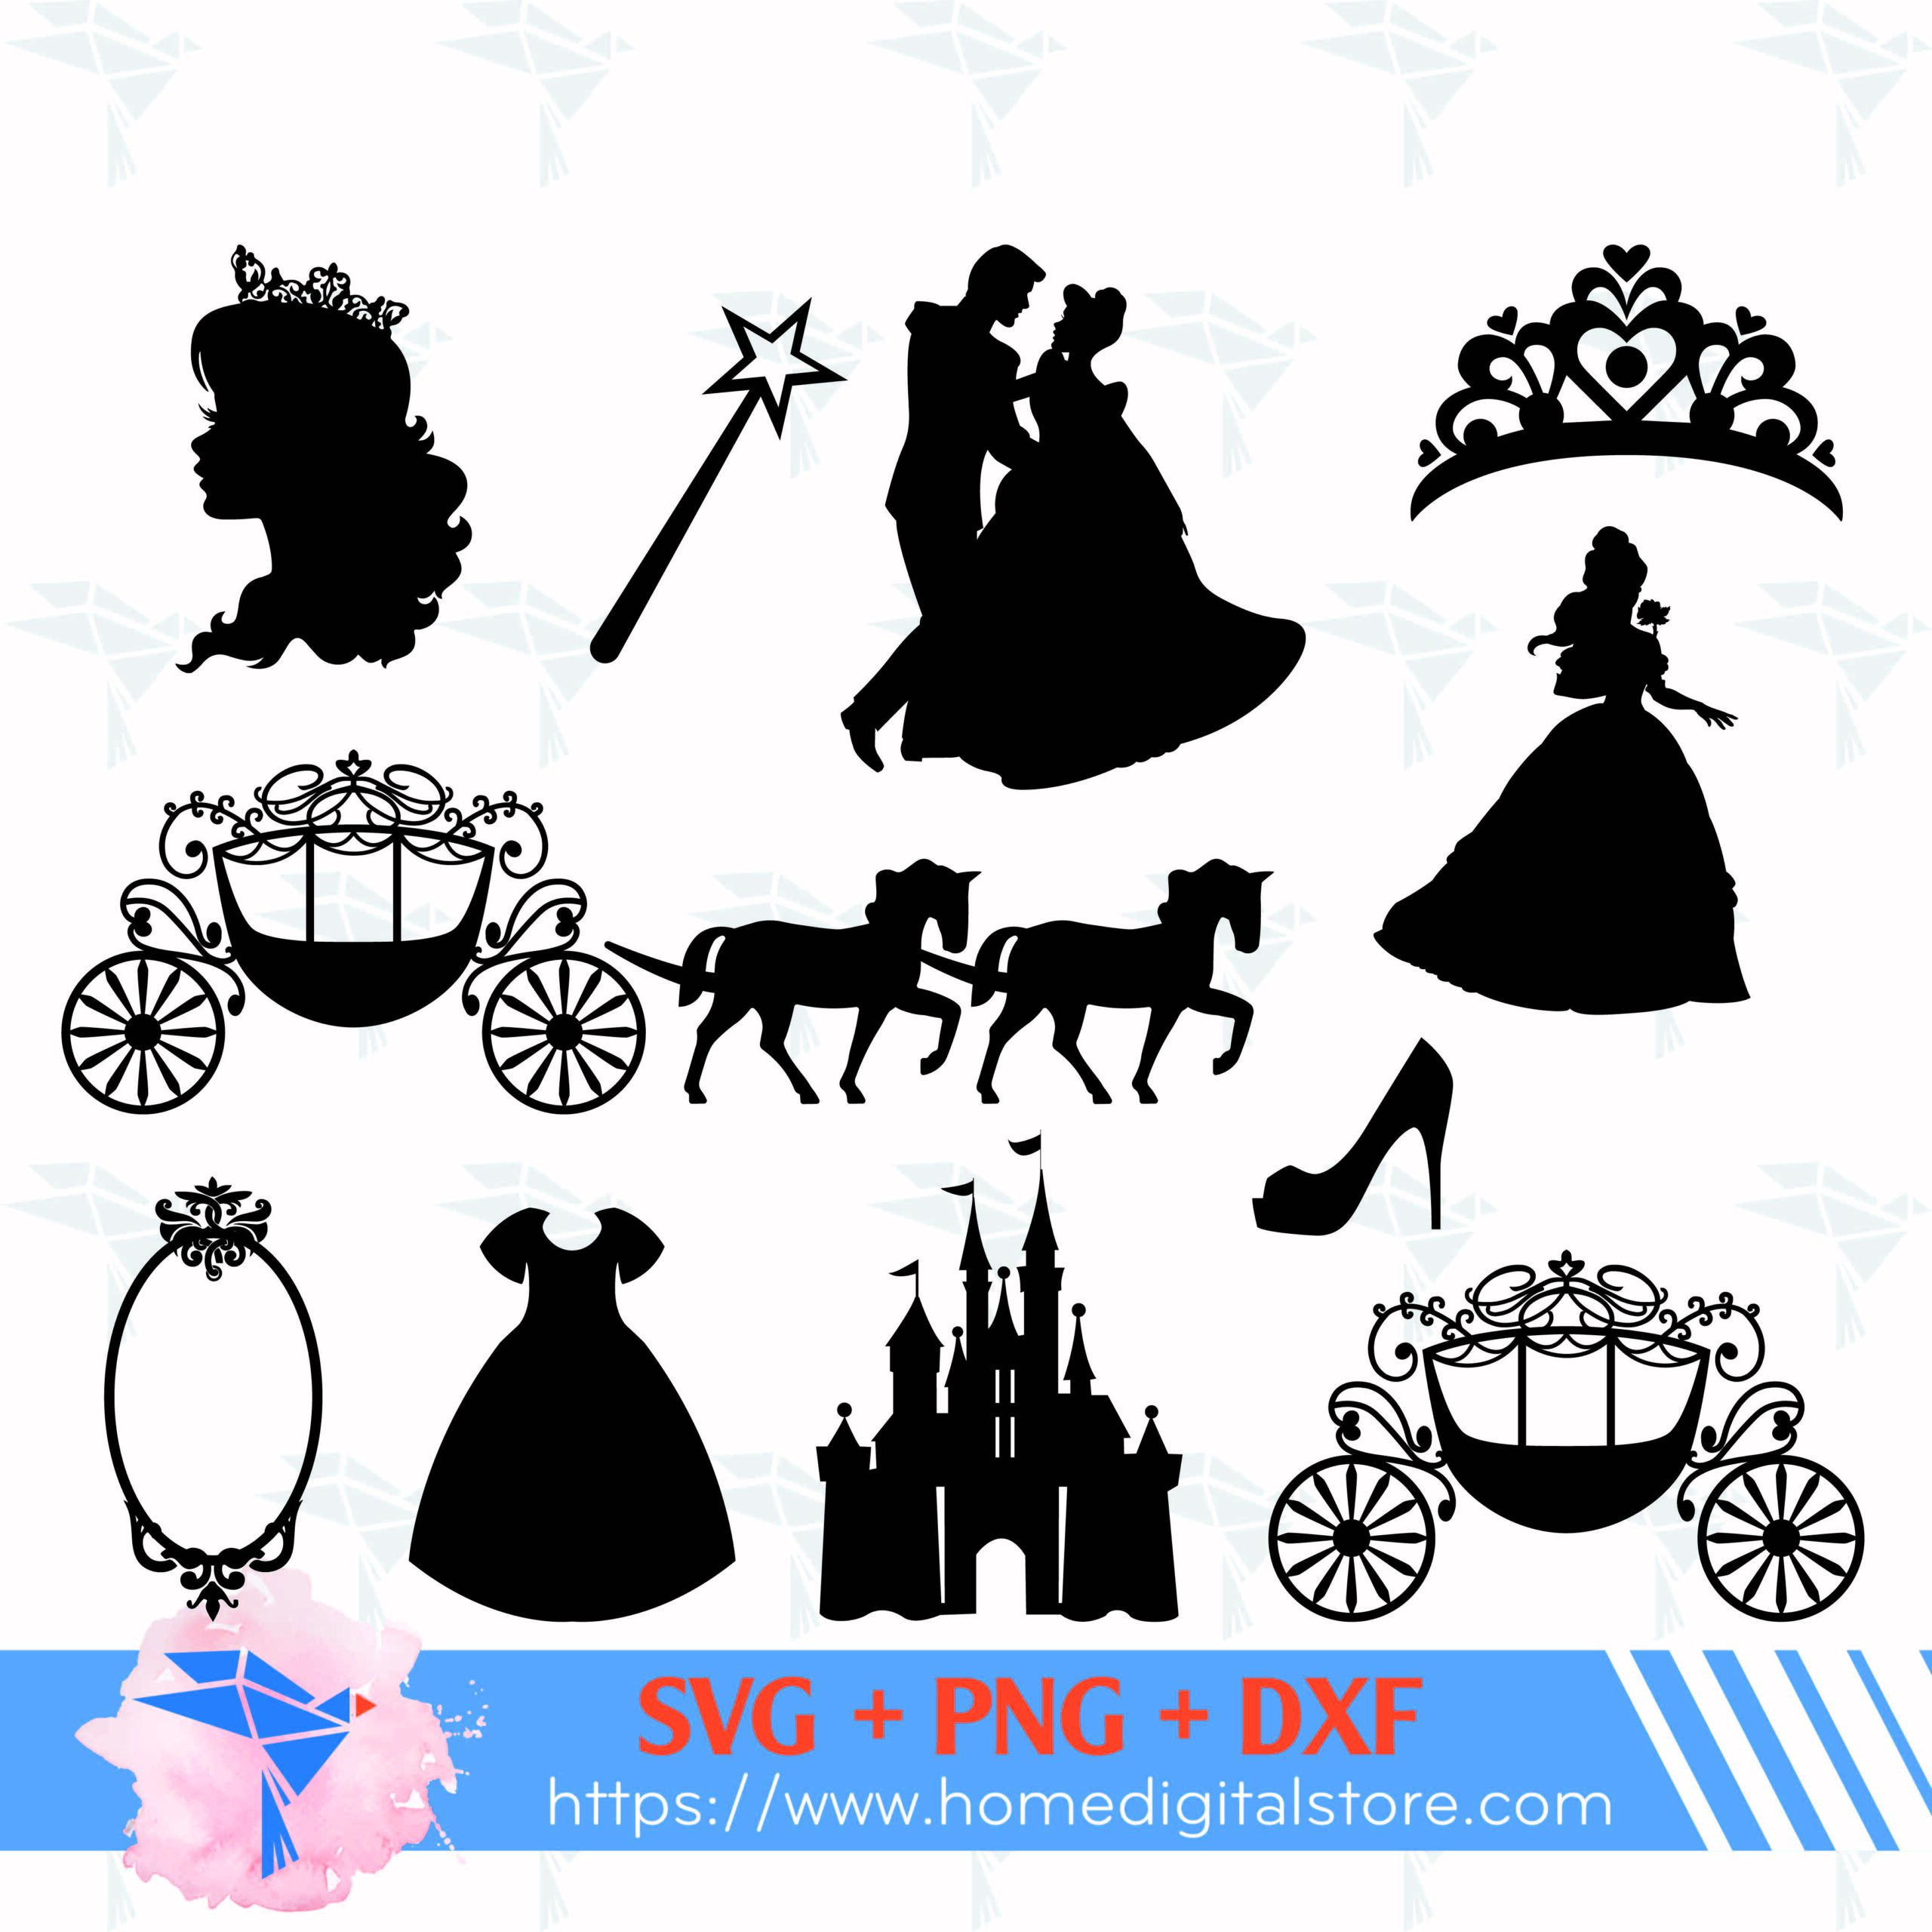 Disney Princess Silhouette SVG, PNG, DXF Instant Download Files For ...